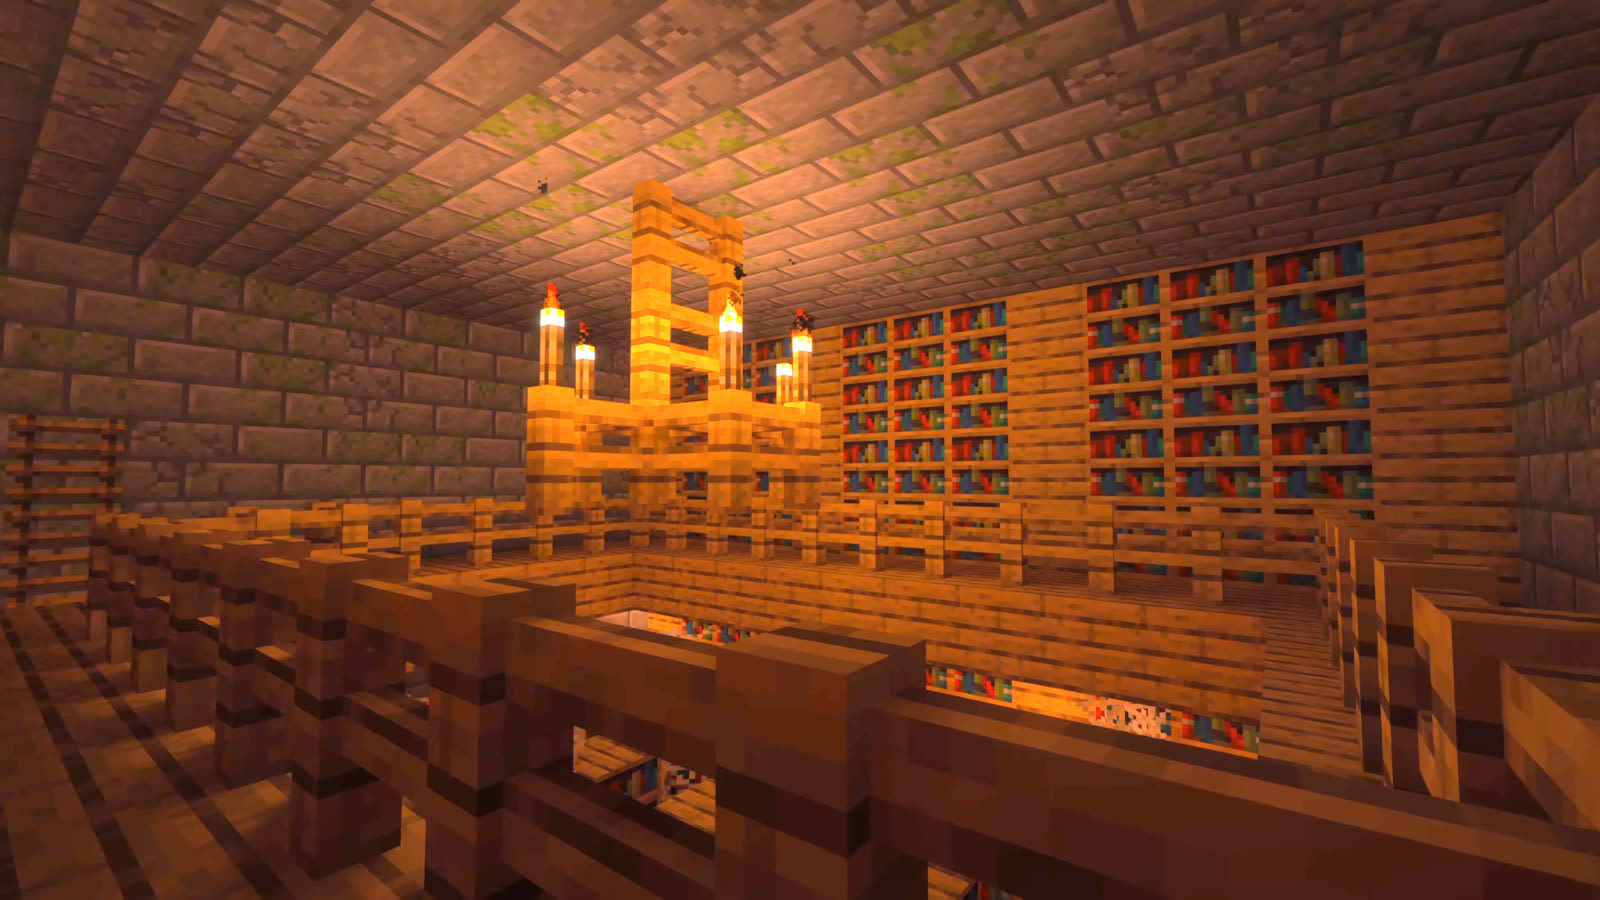 How to make bookshelves in Minecraft: Crafting recipe and complete video guide